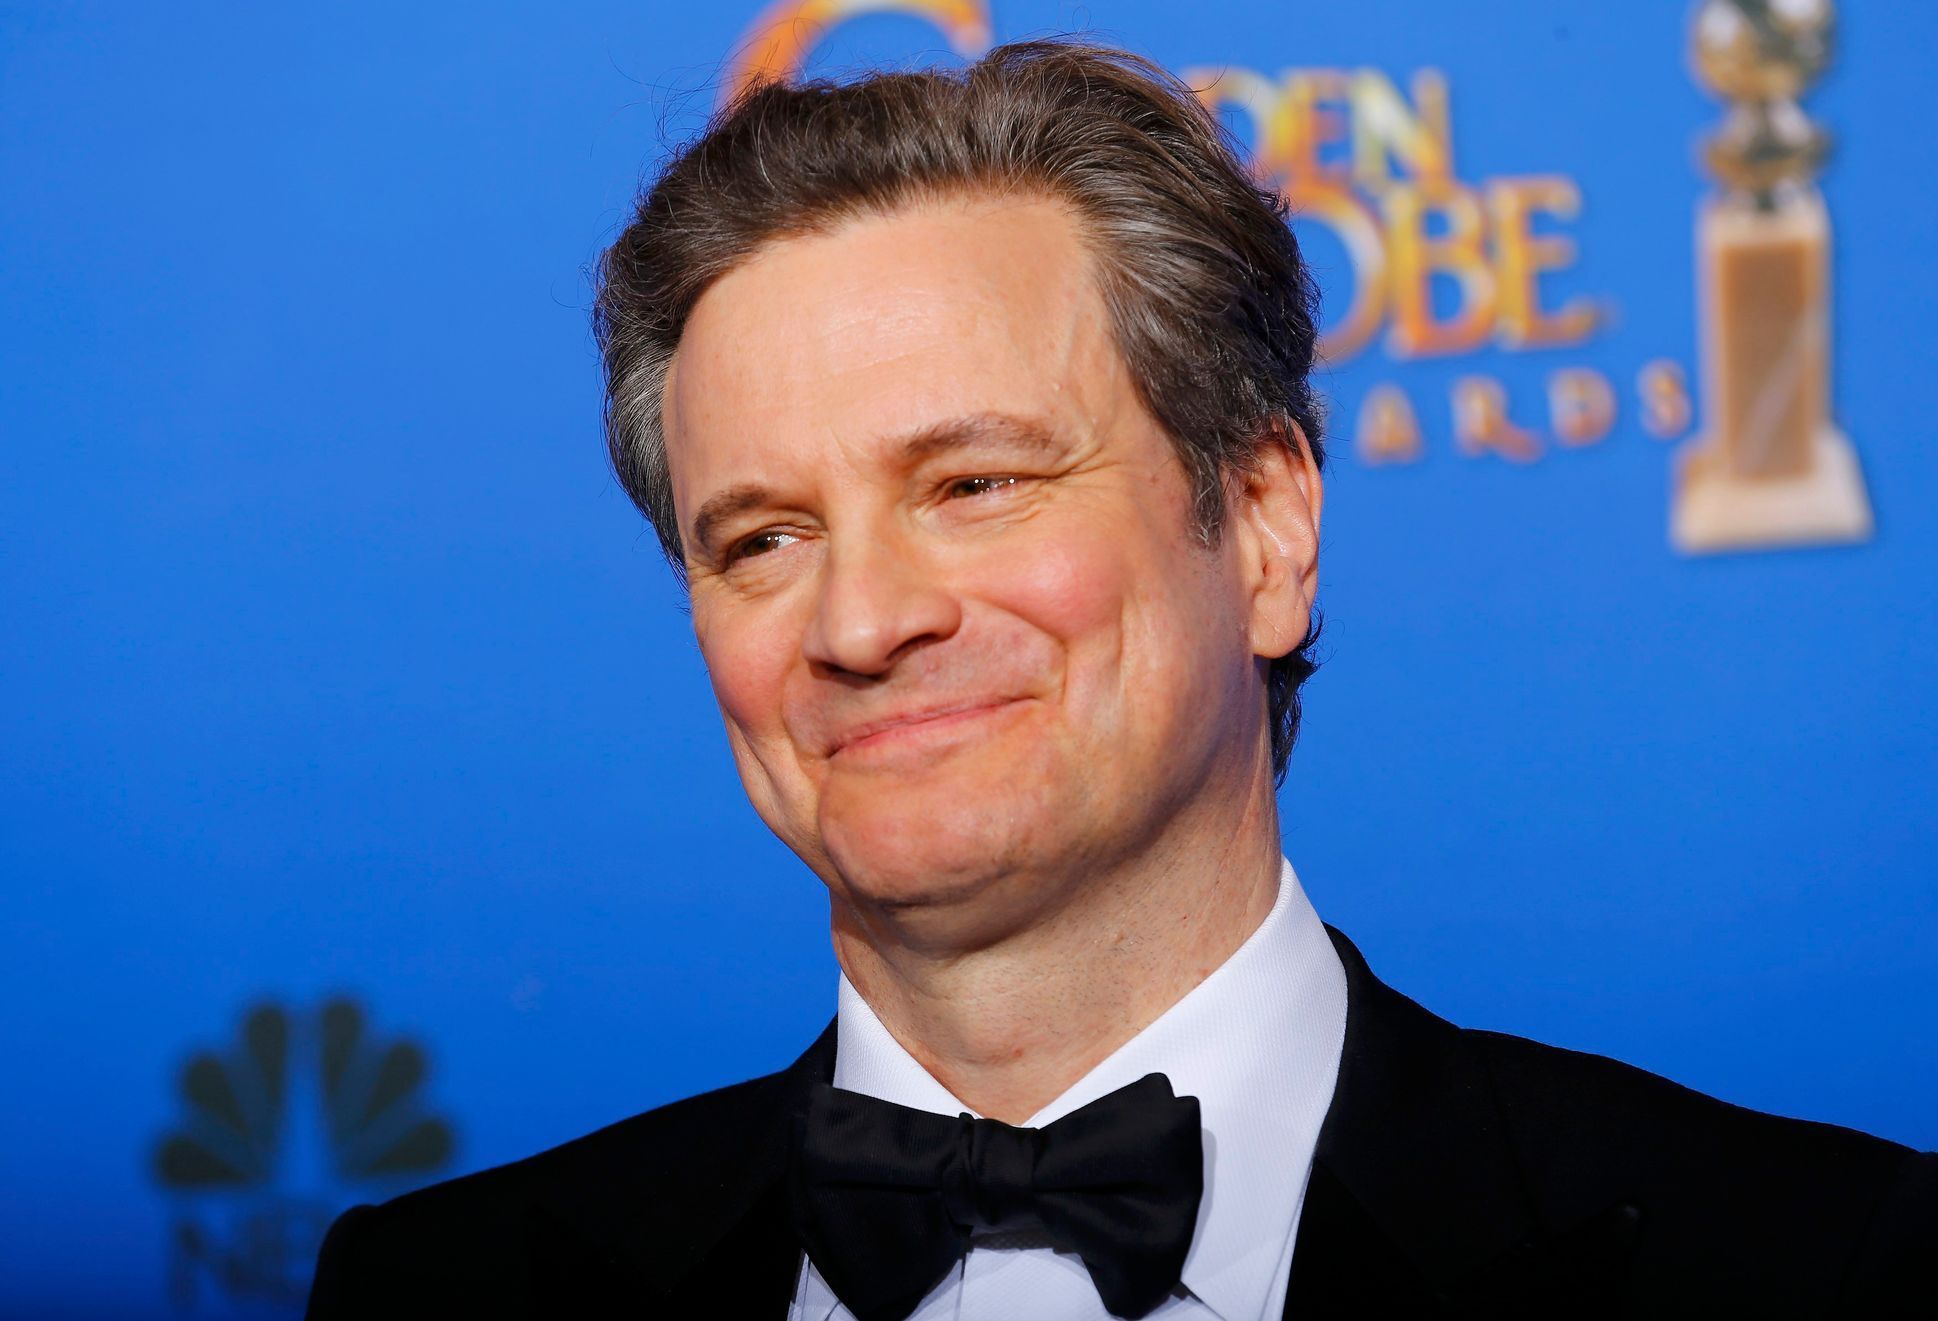 Colin Firth poses backstage during the 72nd Golden Globe Awards in Beverly Hills